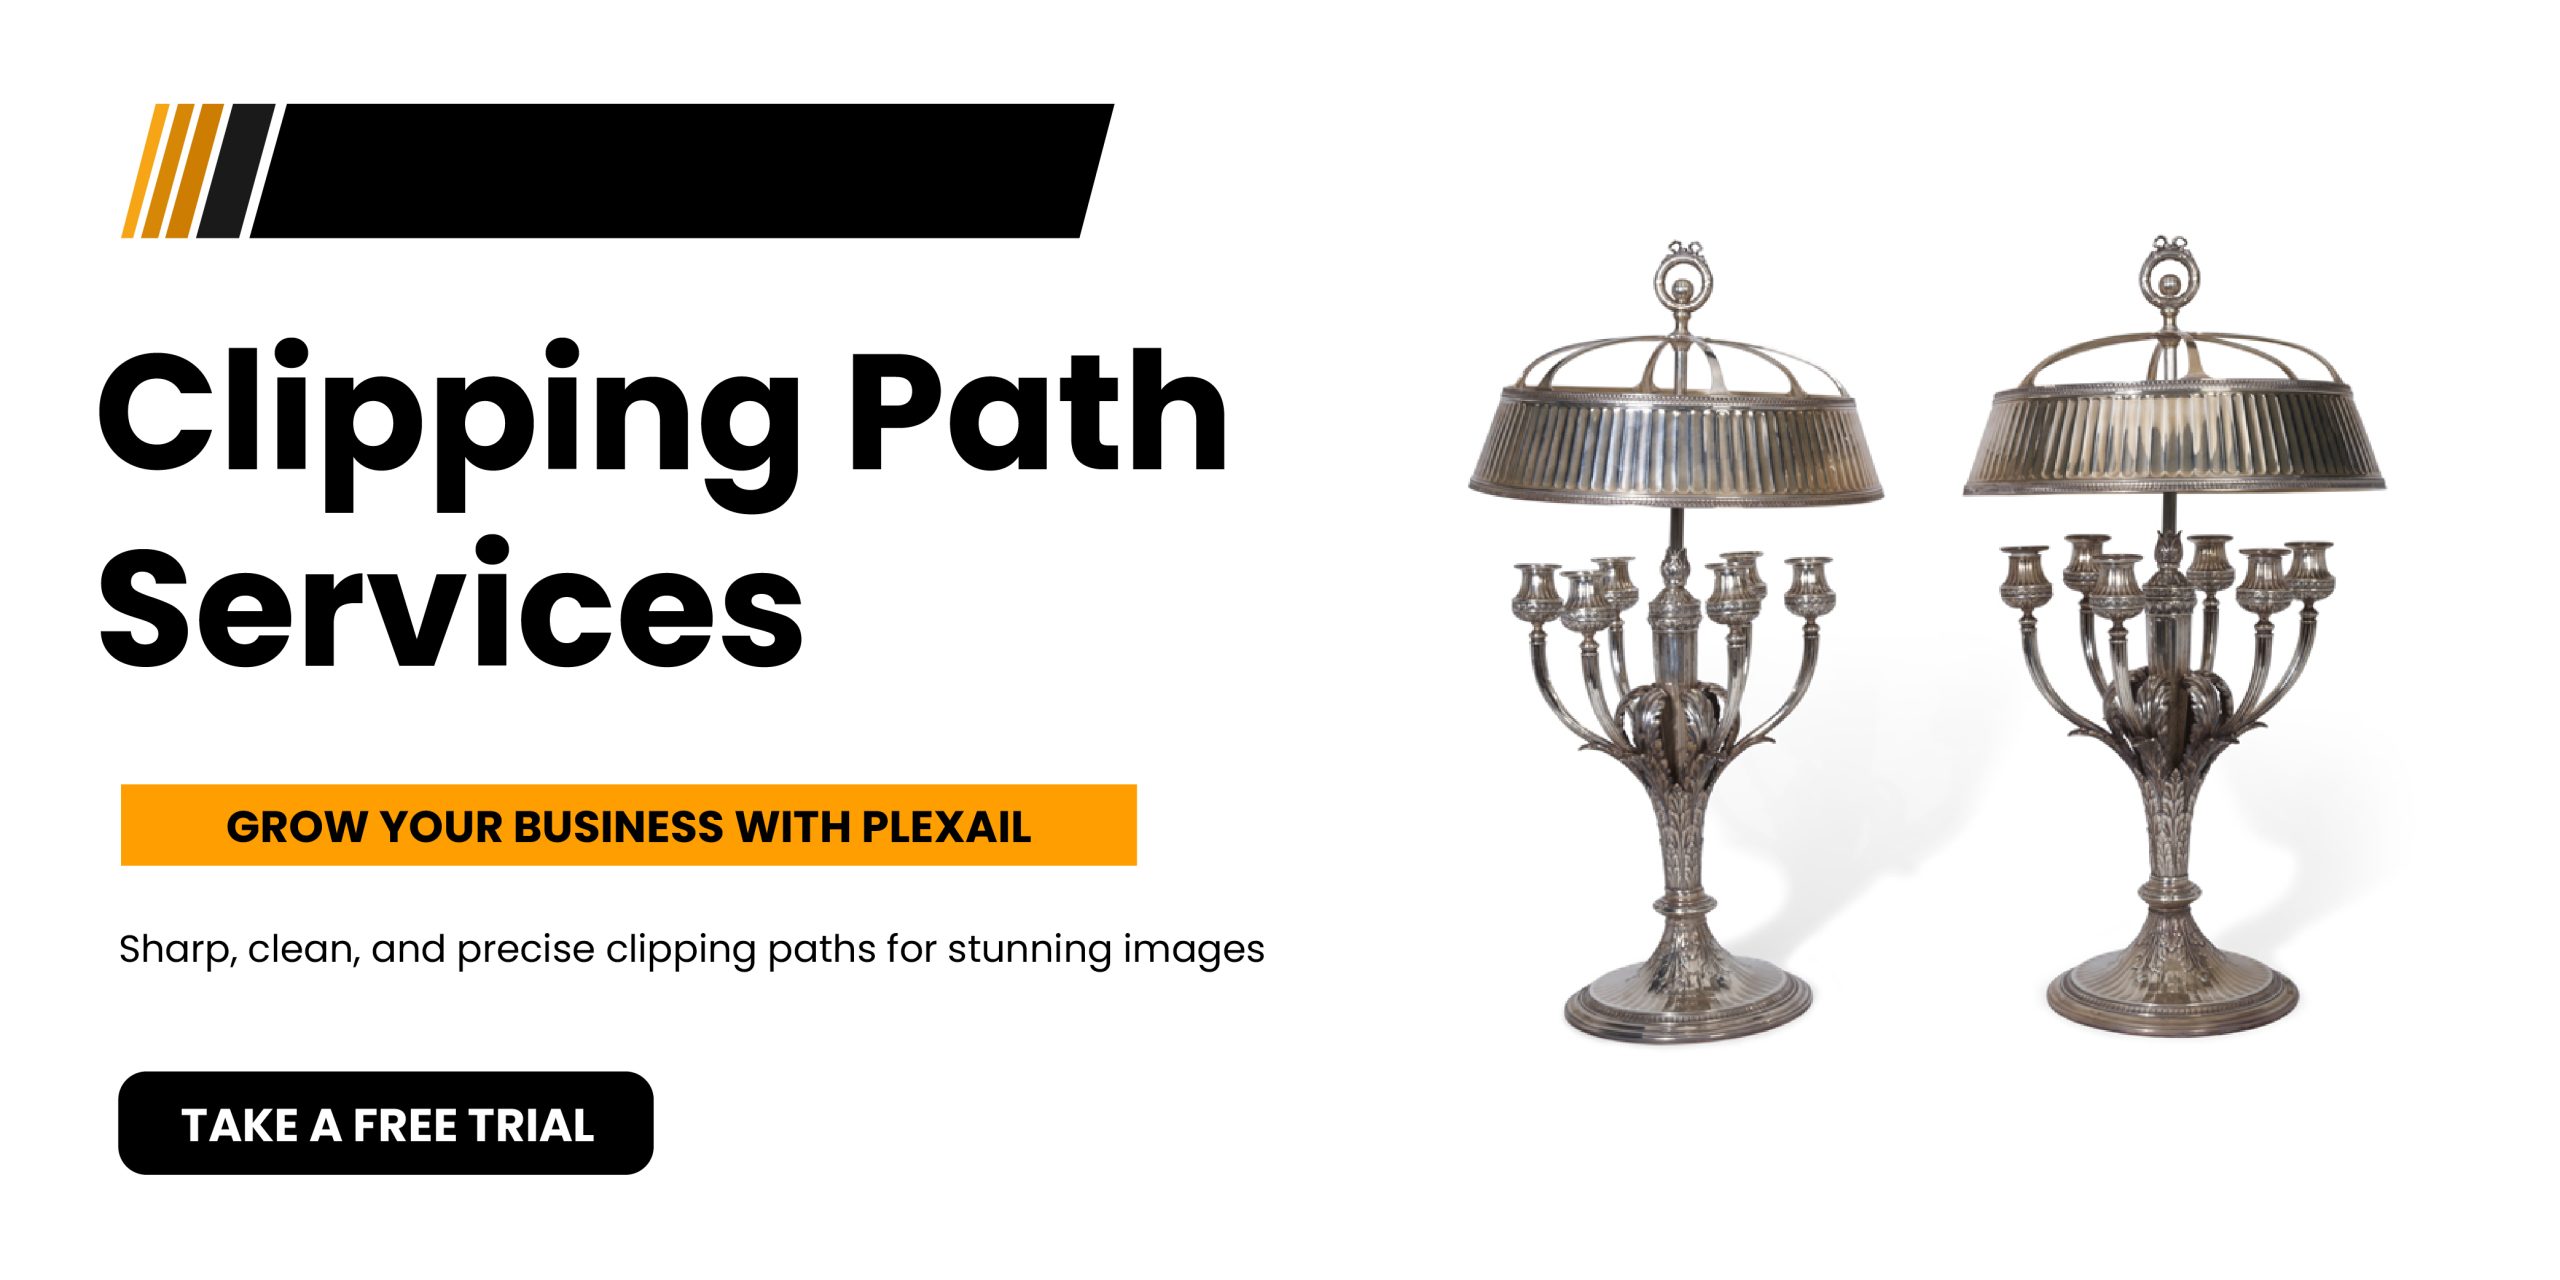 clipping path services provider online